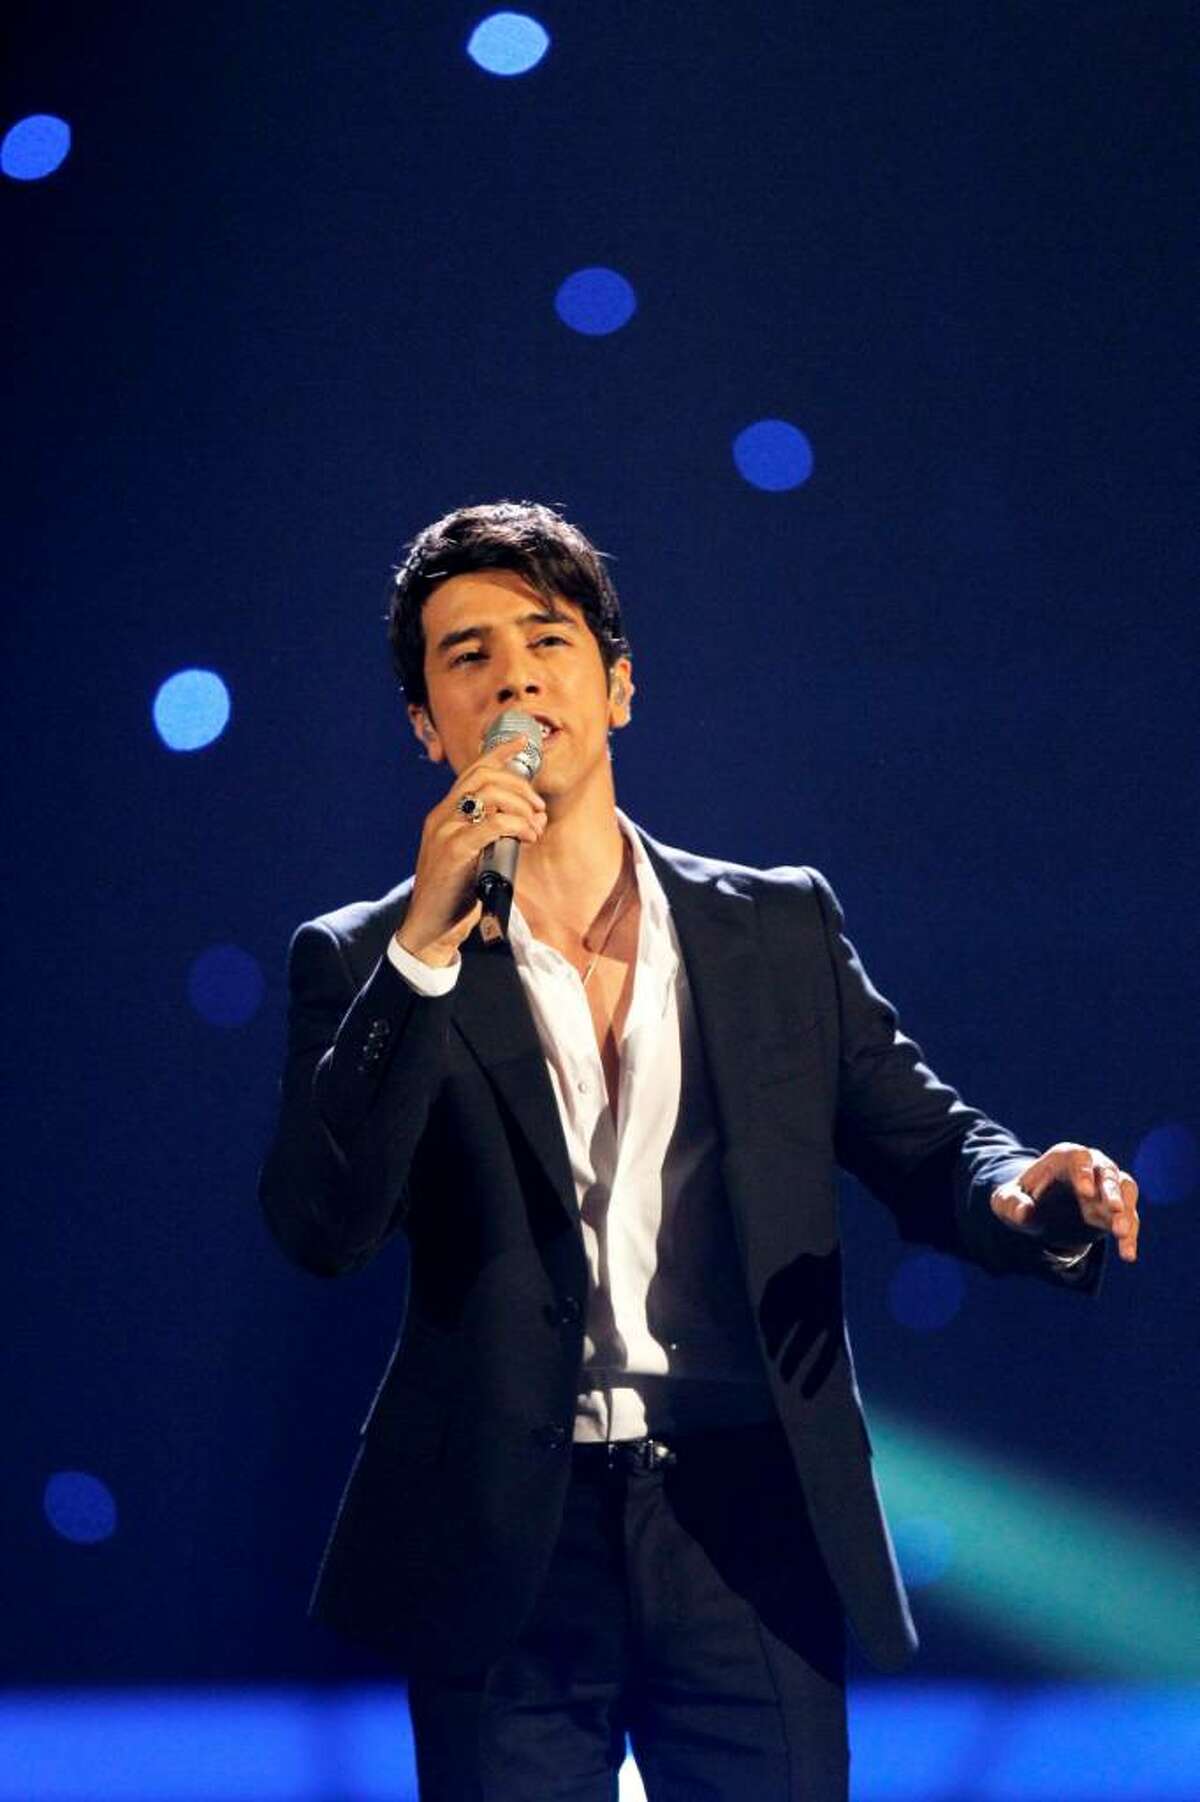 Germany wins 2010 Eurovision Song Contest